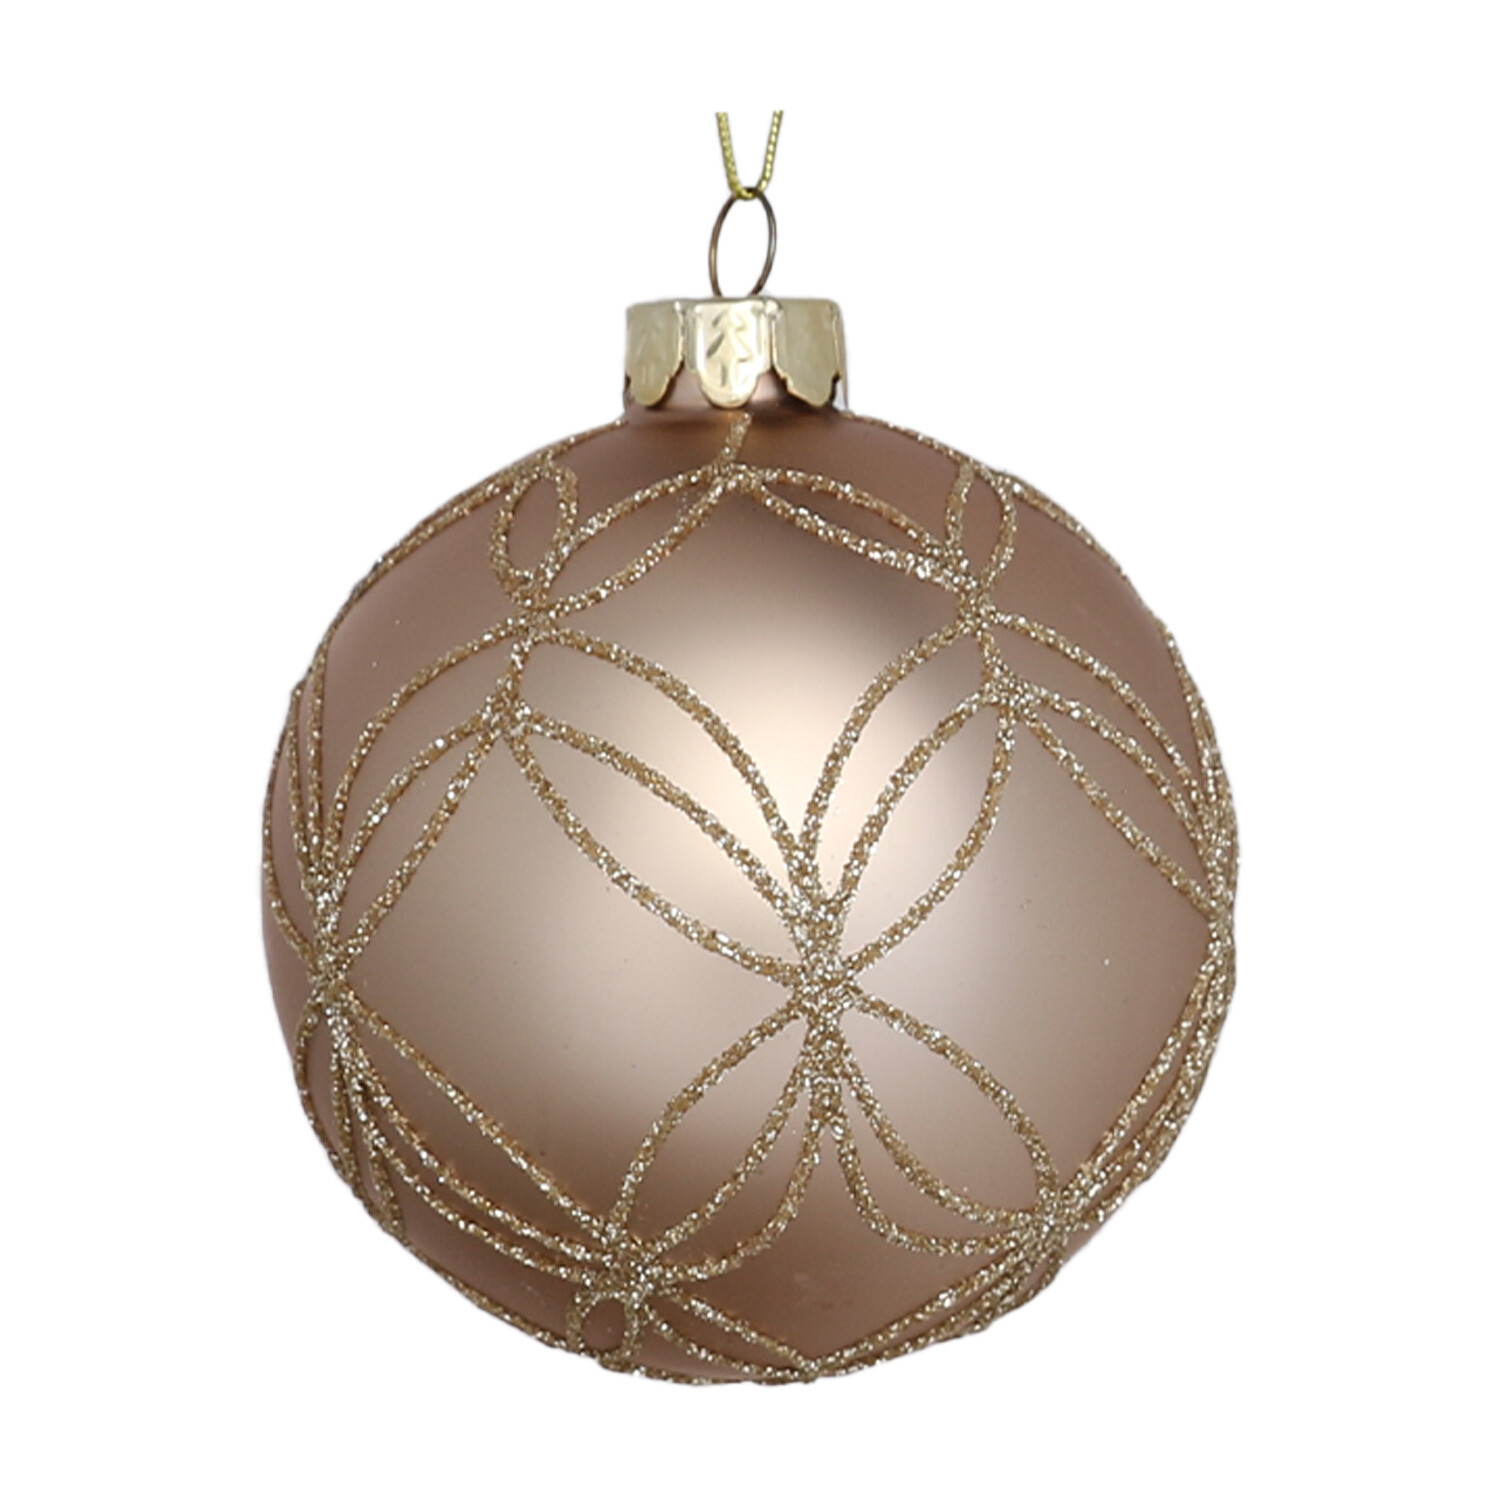 Single Decadent Bronze Copper Embellished Bauble in Assorted styles Image 2